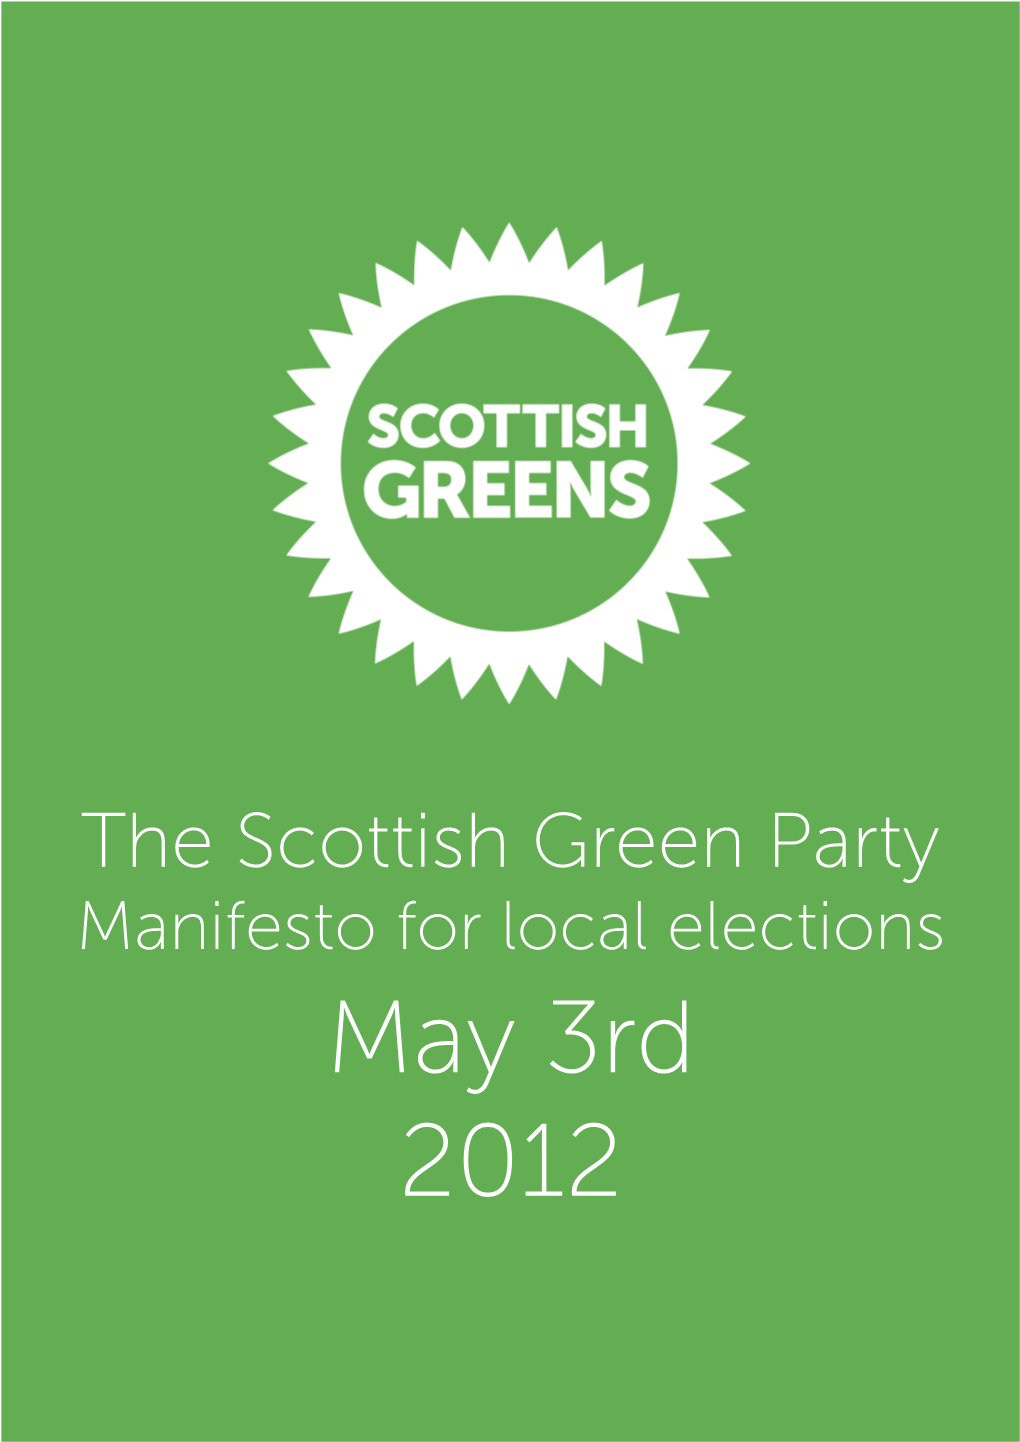 May 3Rd 2012 New Directions for Local Councils an Action Plan for Green Councillors in Scotland Message from Patrick Harvie MSP and Alison Johnstone MSP